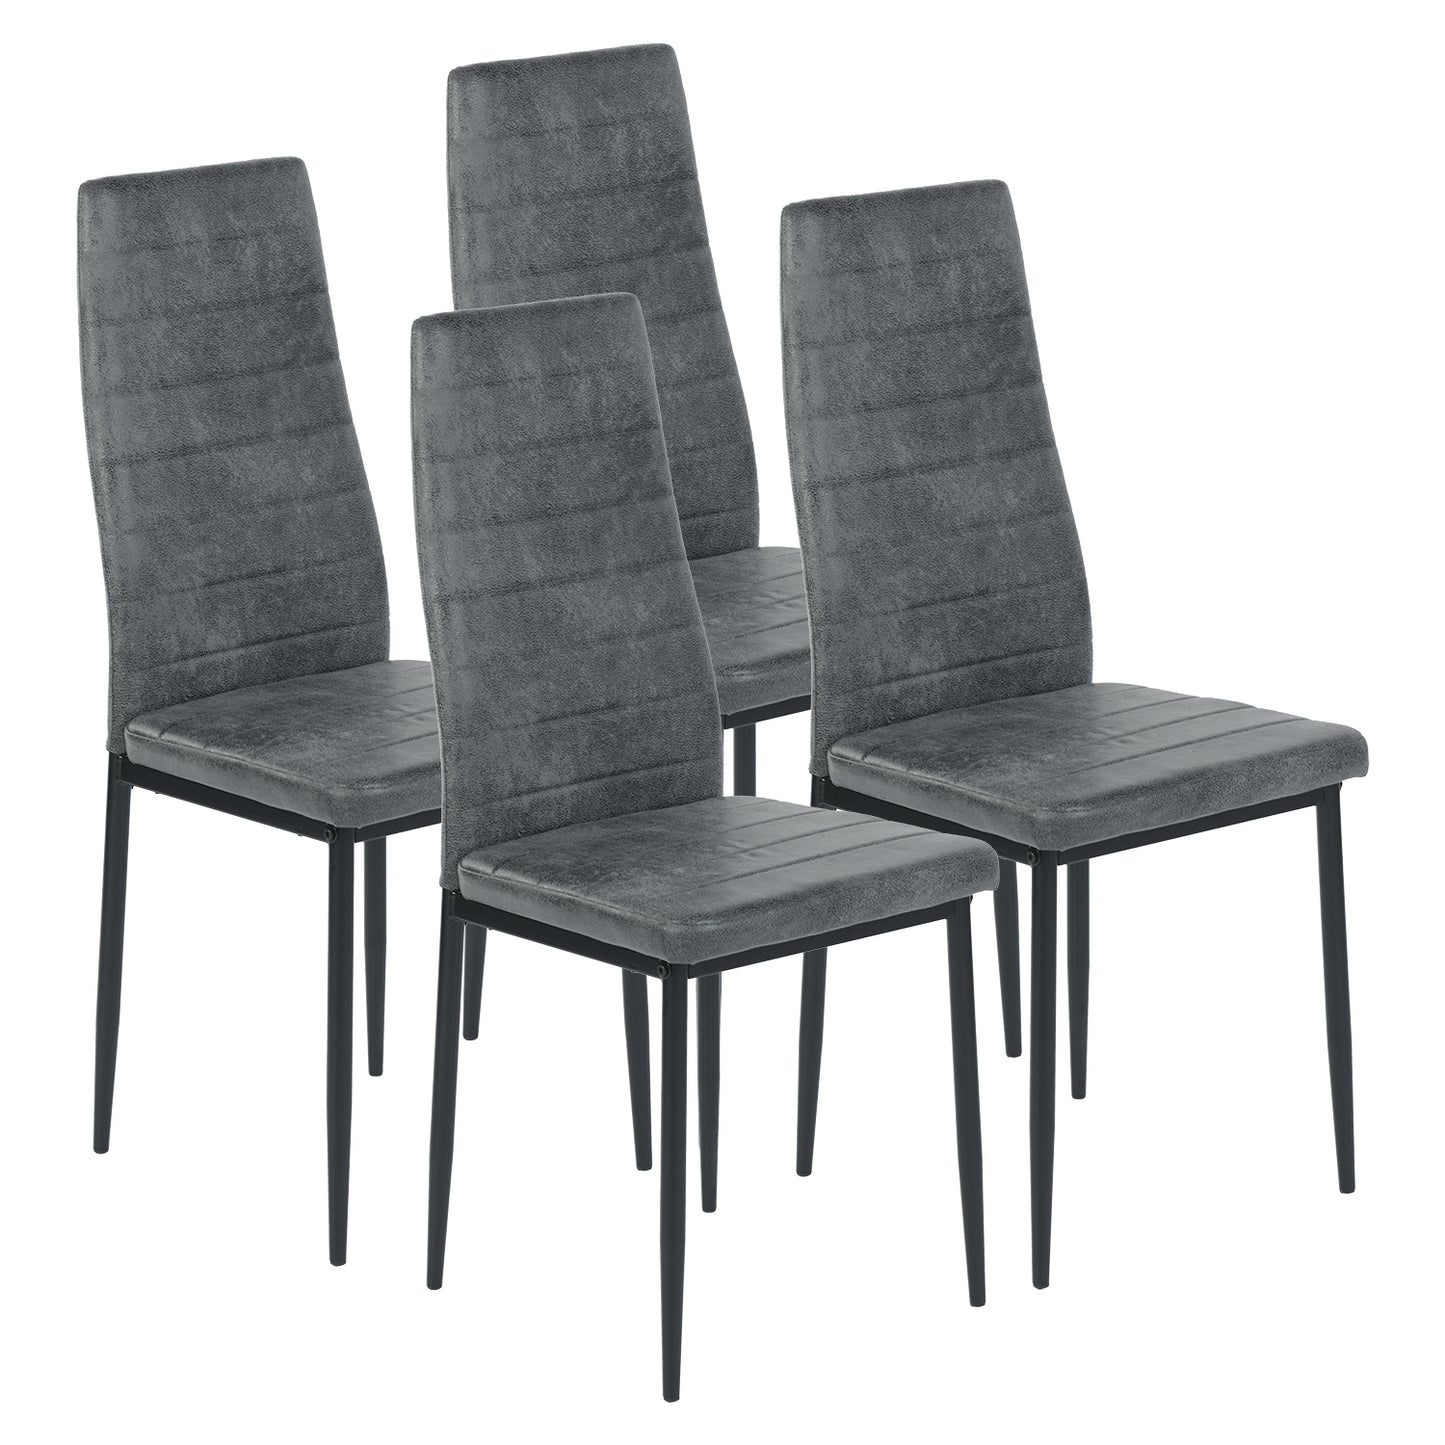 ANN SUEDE Upholstered Side Chairs (Set of 4)